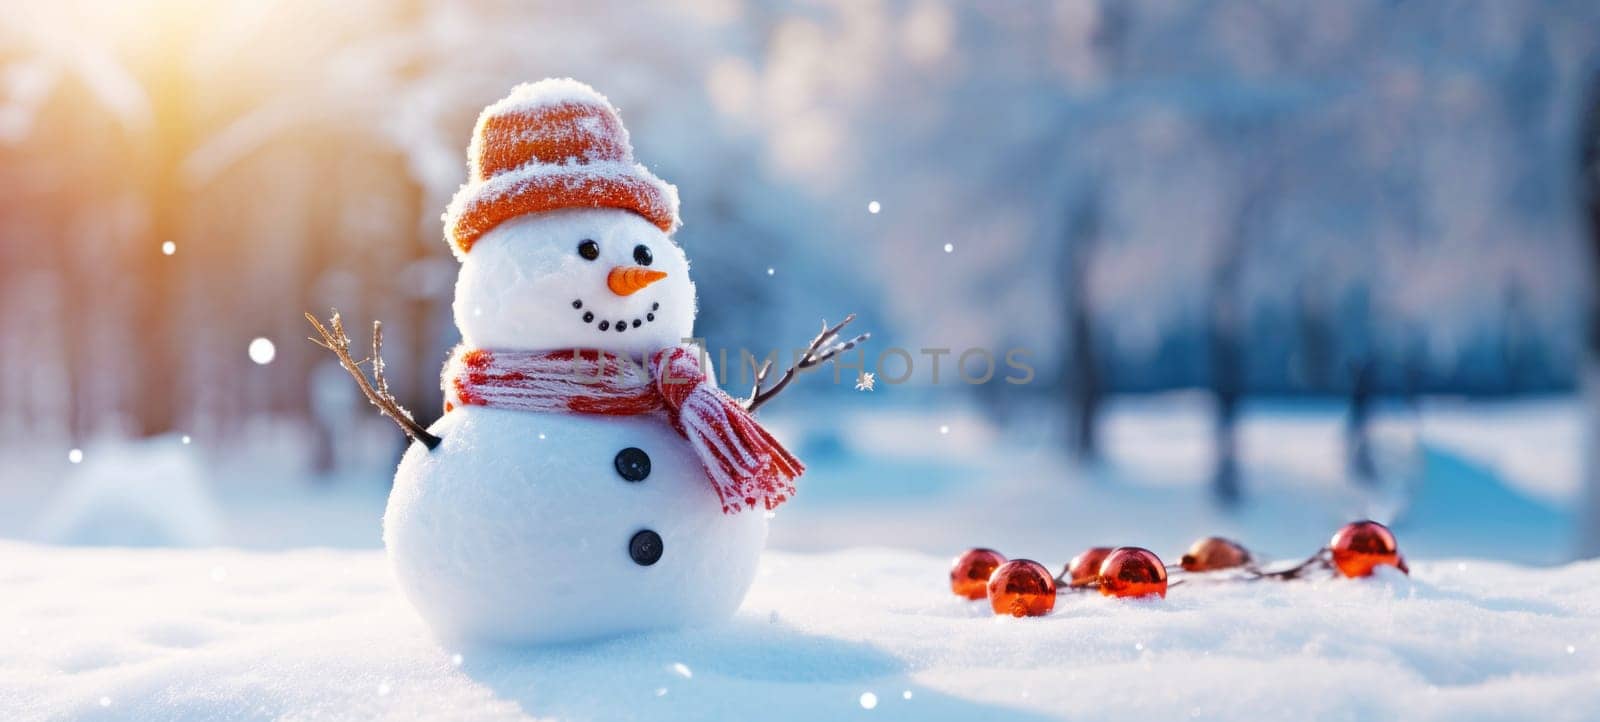 Snowman and Snowing Background by NataliPopova